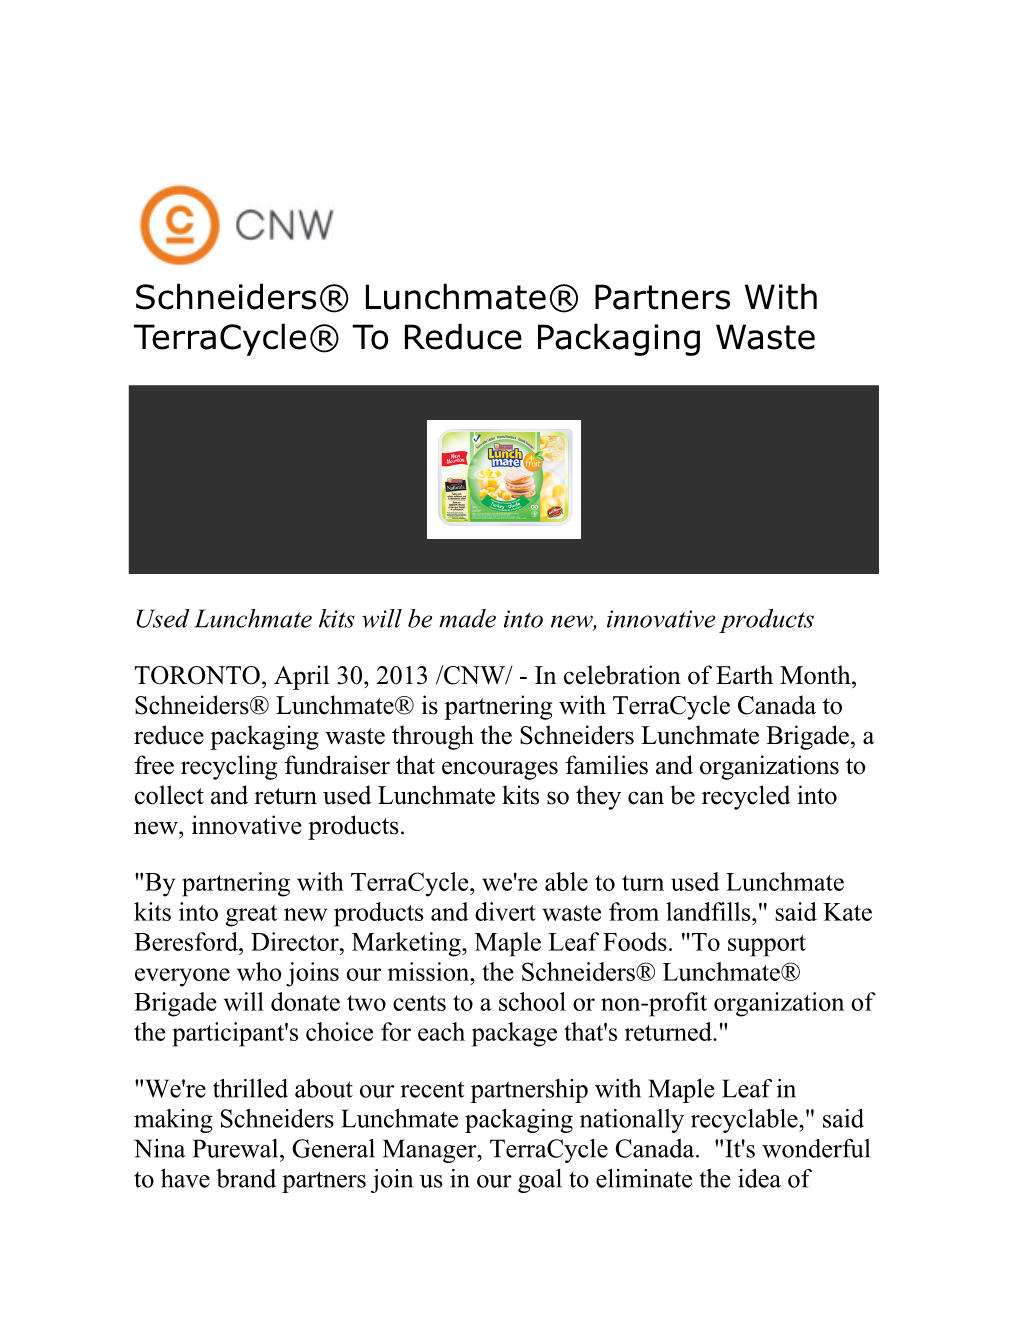 Schneiders® Lunchmate® Partners with Terracycle® to Reduce Packaging Waste